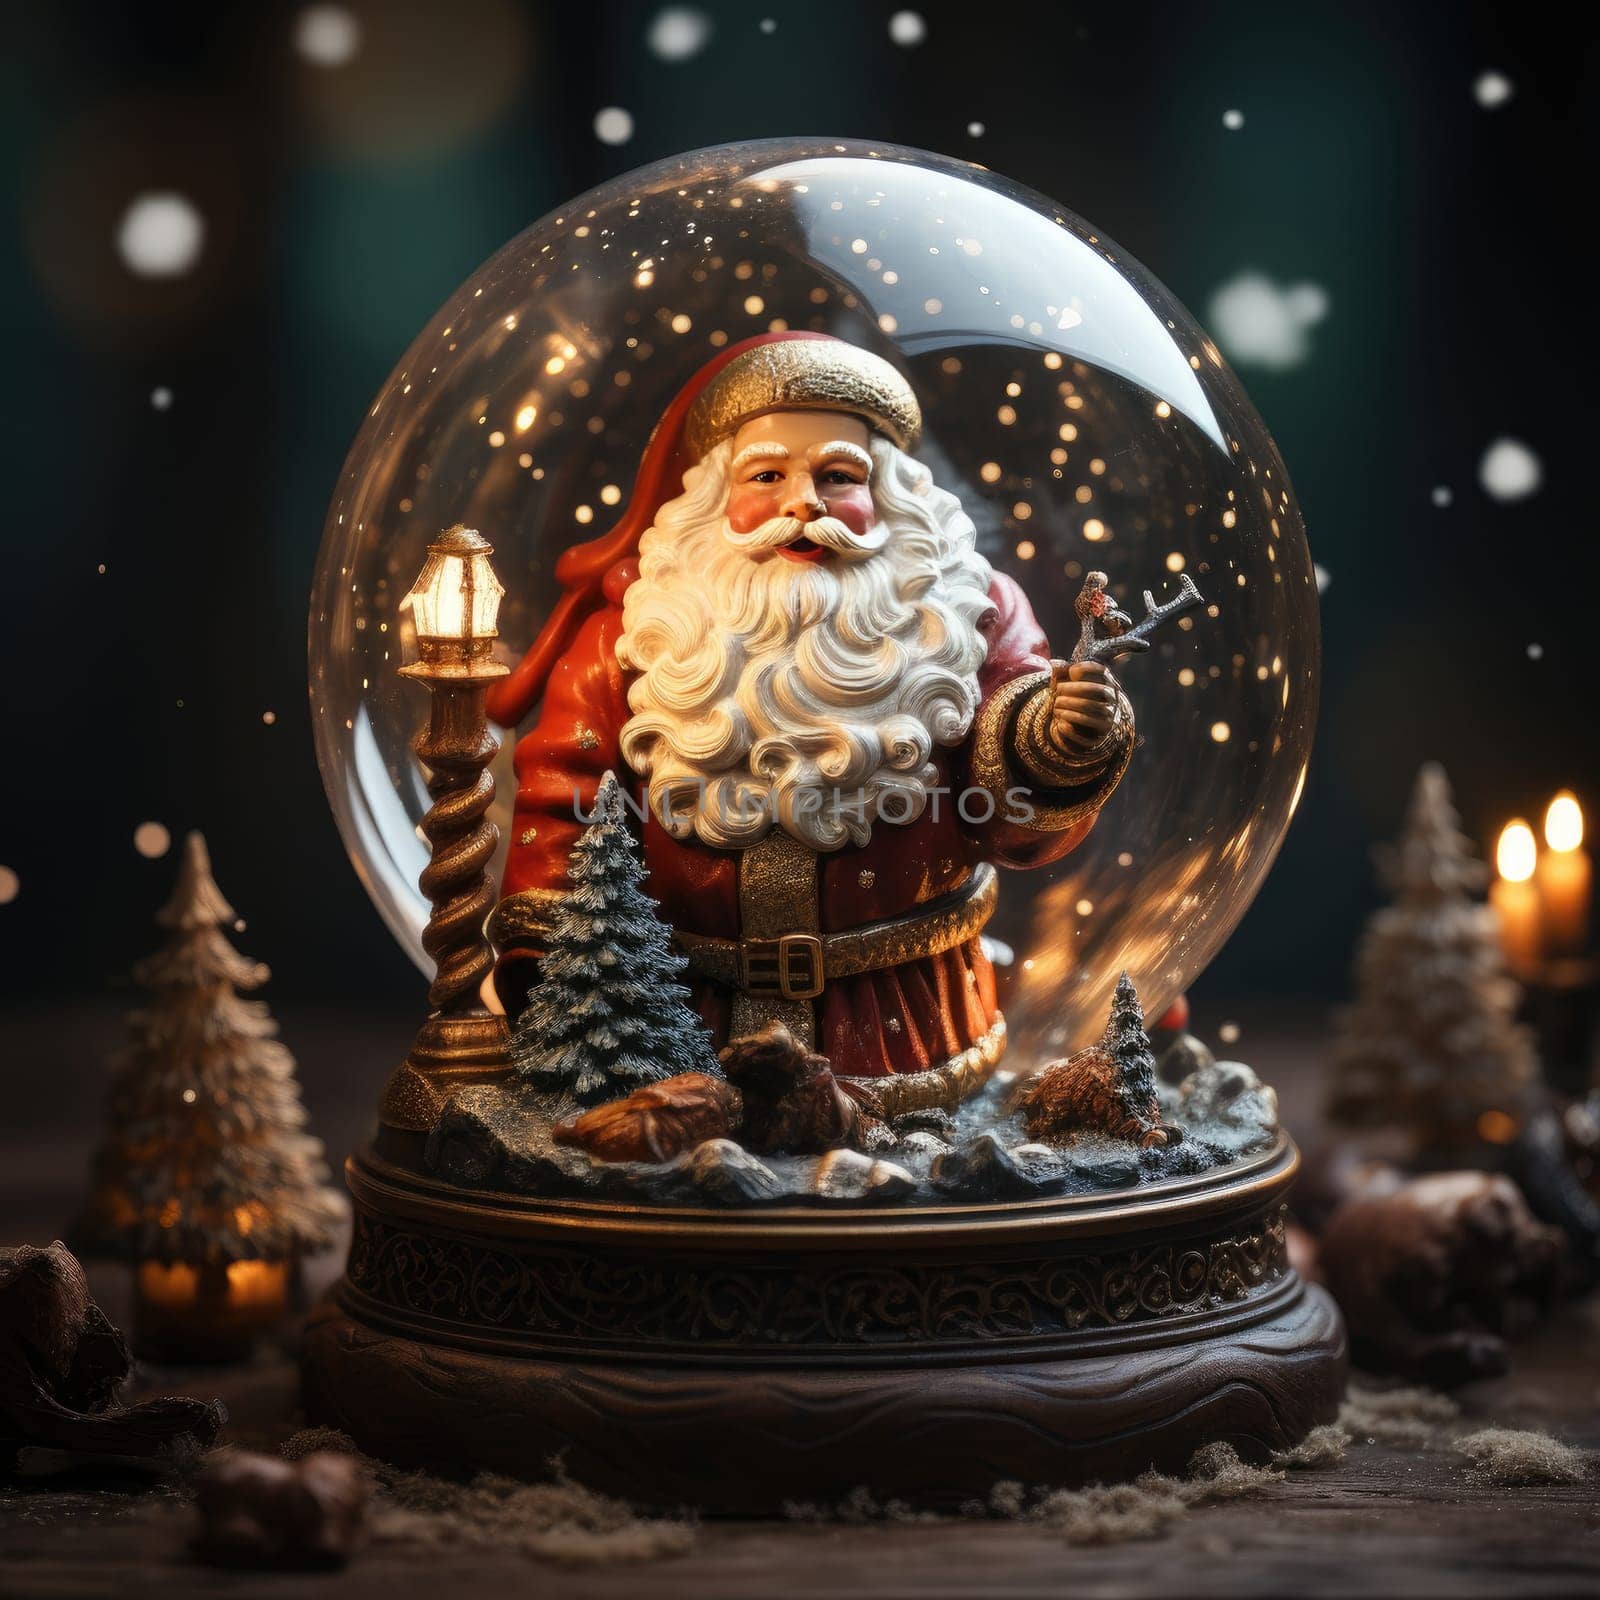 A beautifully crafted glass ball decoration featuring a cheerful Santa Claus is perfect for adding a festive cheer to your Christmas d cor or as a soulful gift for the holidays...